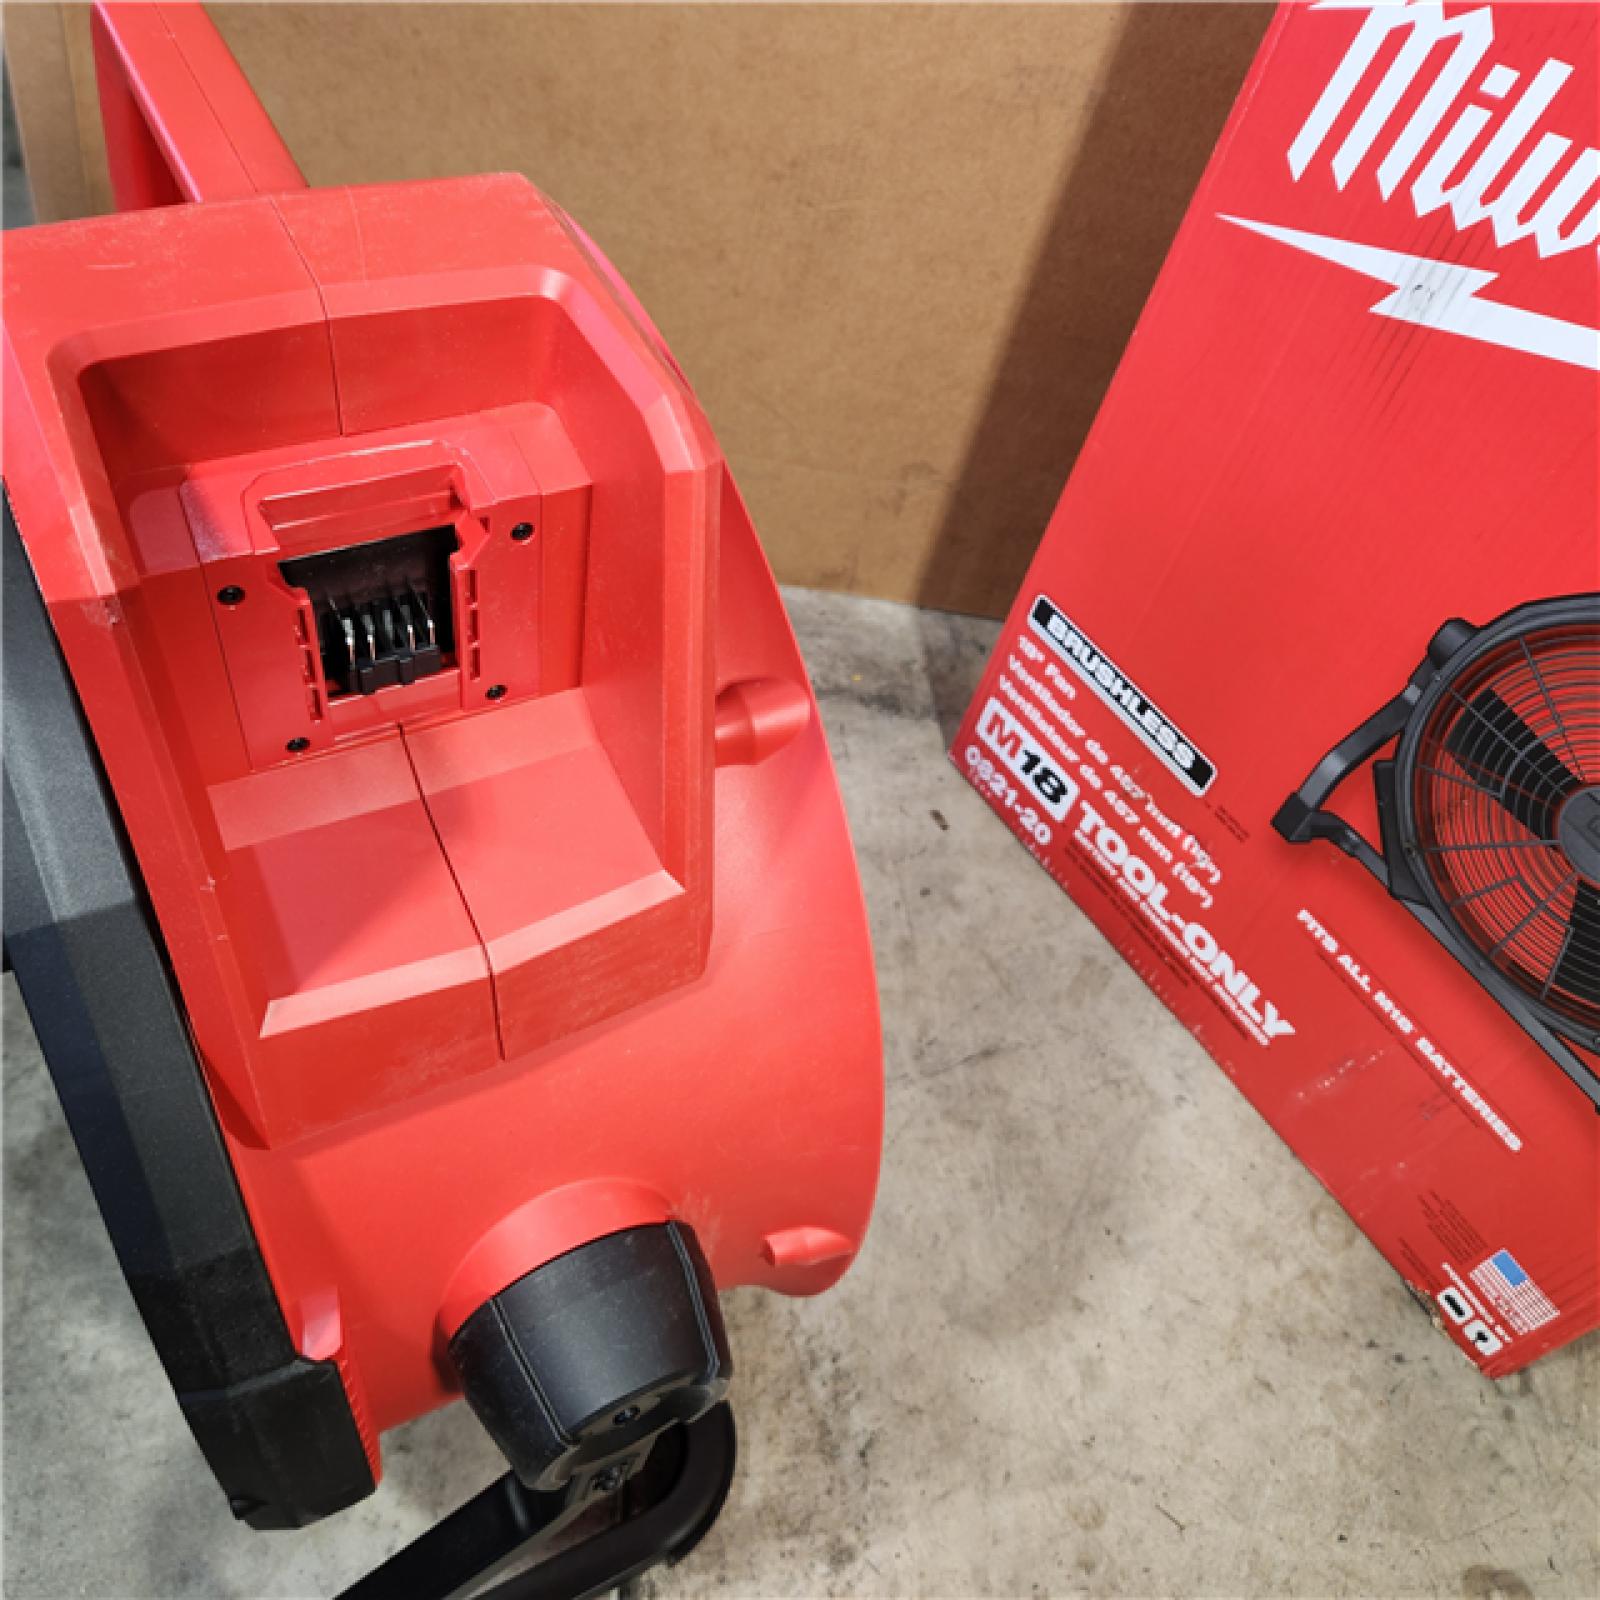 Houston Location - AS- IS Milwaukee 0821-20 M18 18 Fan (Tool Only) - Appears IN NEW Condition